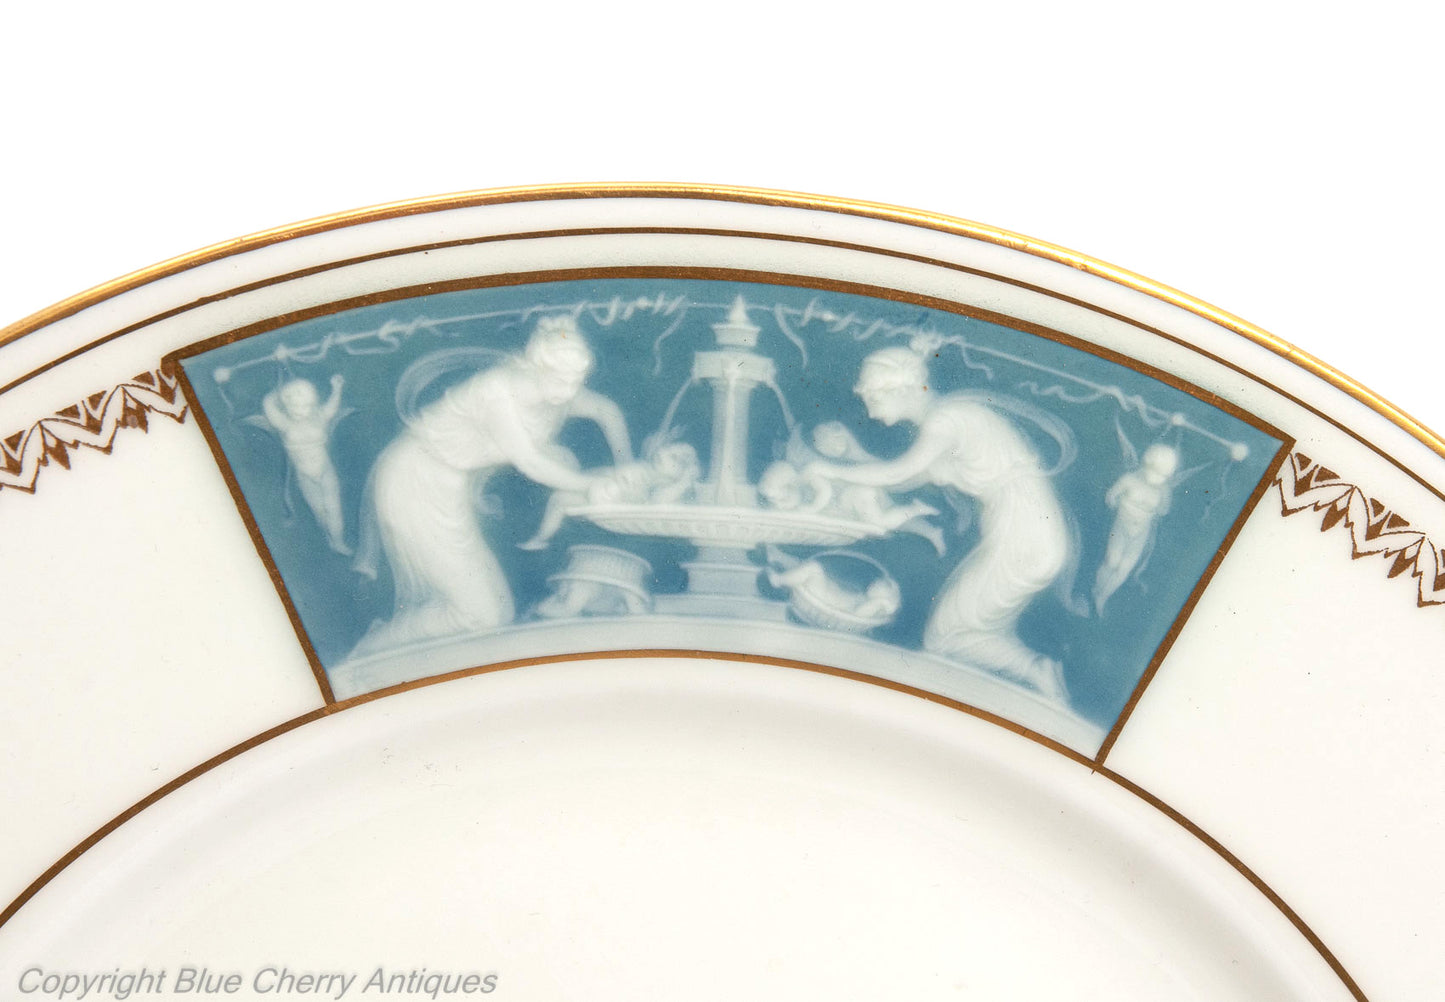 Minton China Tri Panel Pate sur Pate and Gilt Plate by Alboin Birks c1931 (Code 1967)